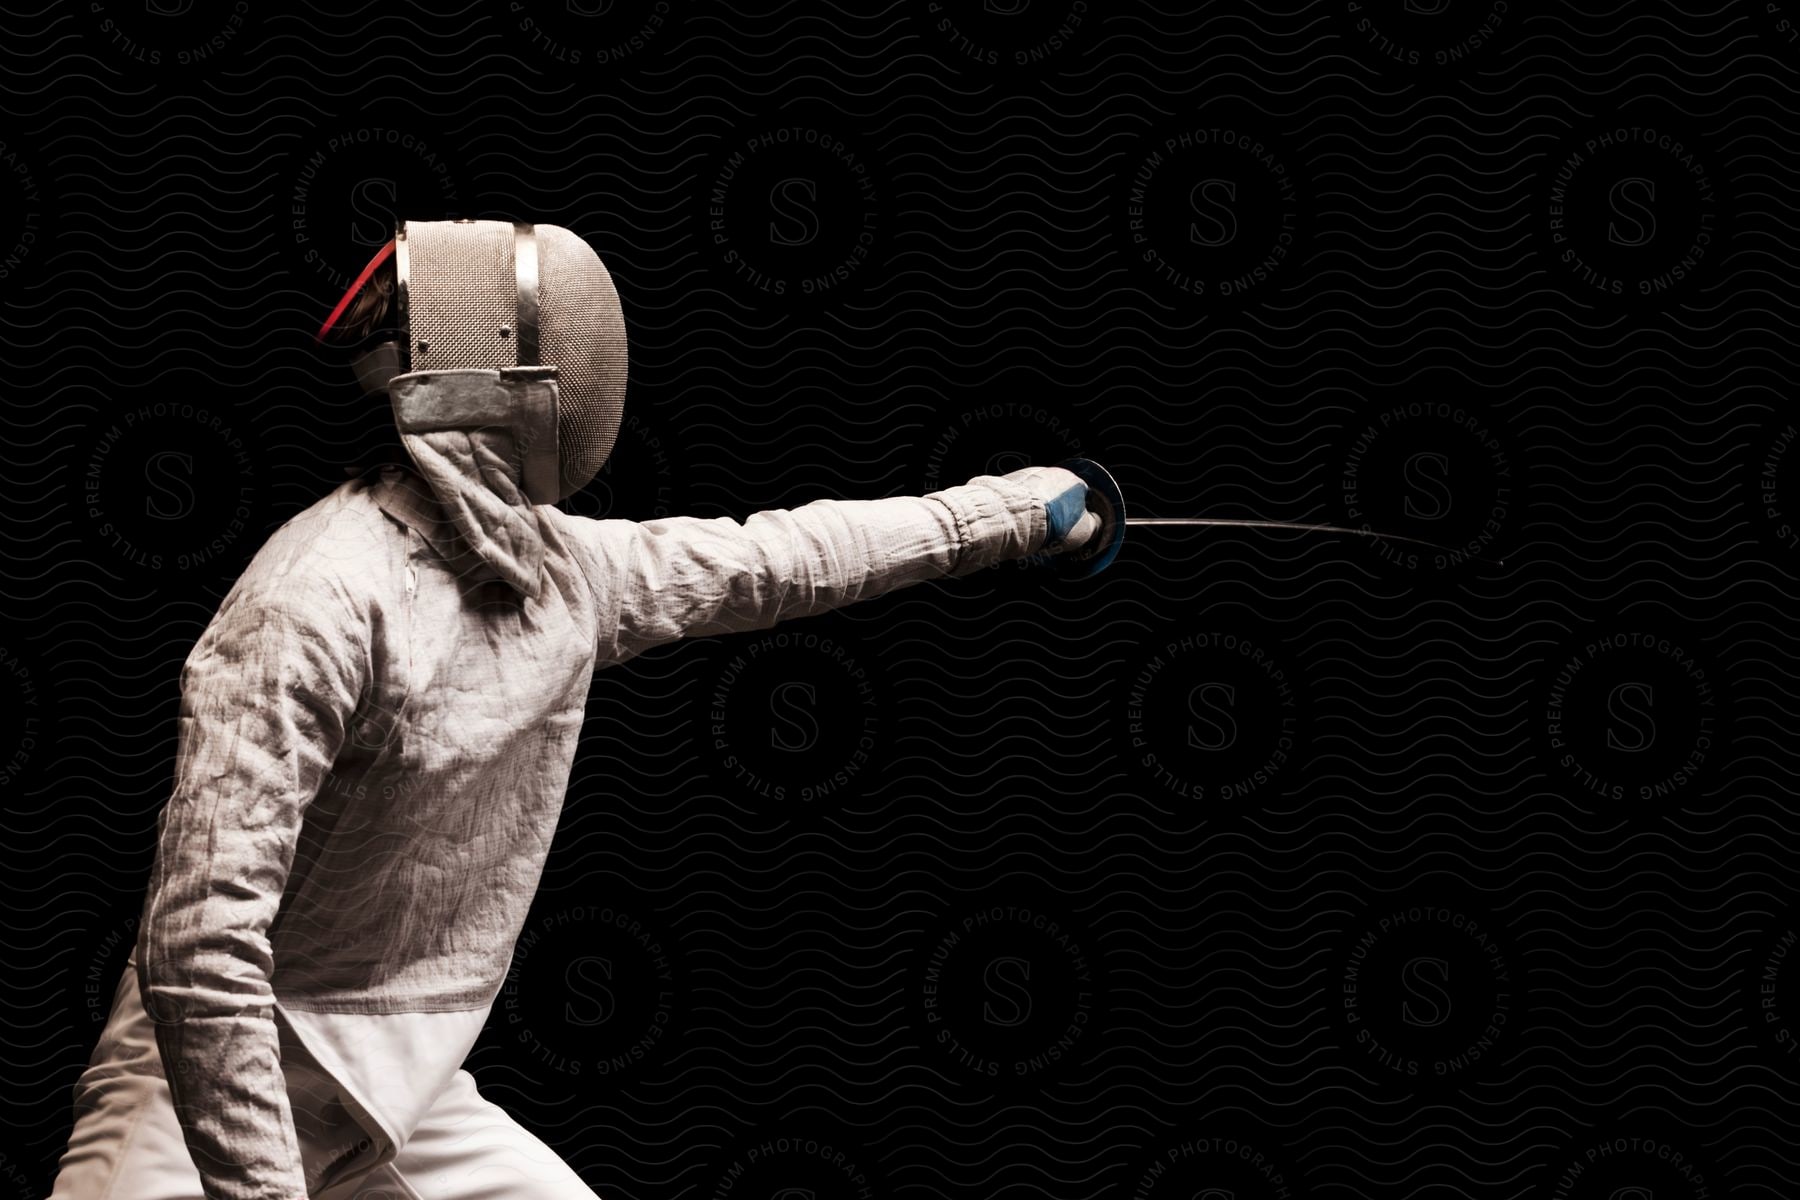 A person wearing a fencing mask and protective gear is lunging forward with a sword